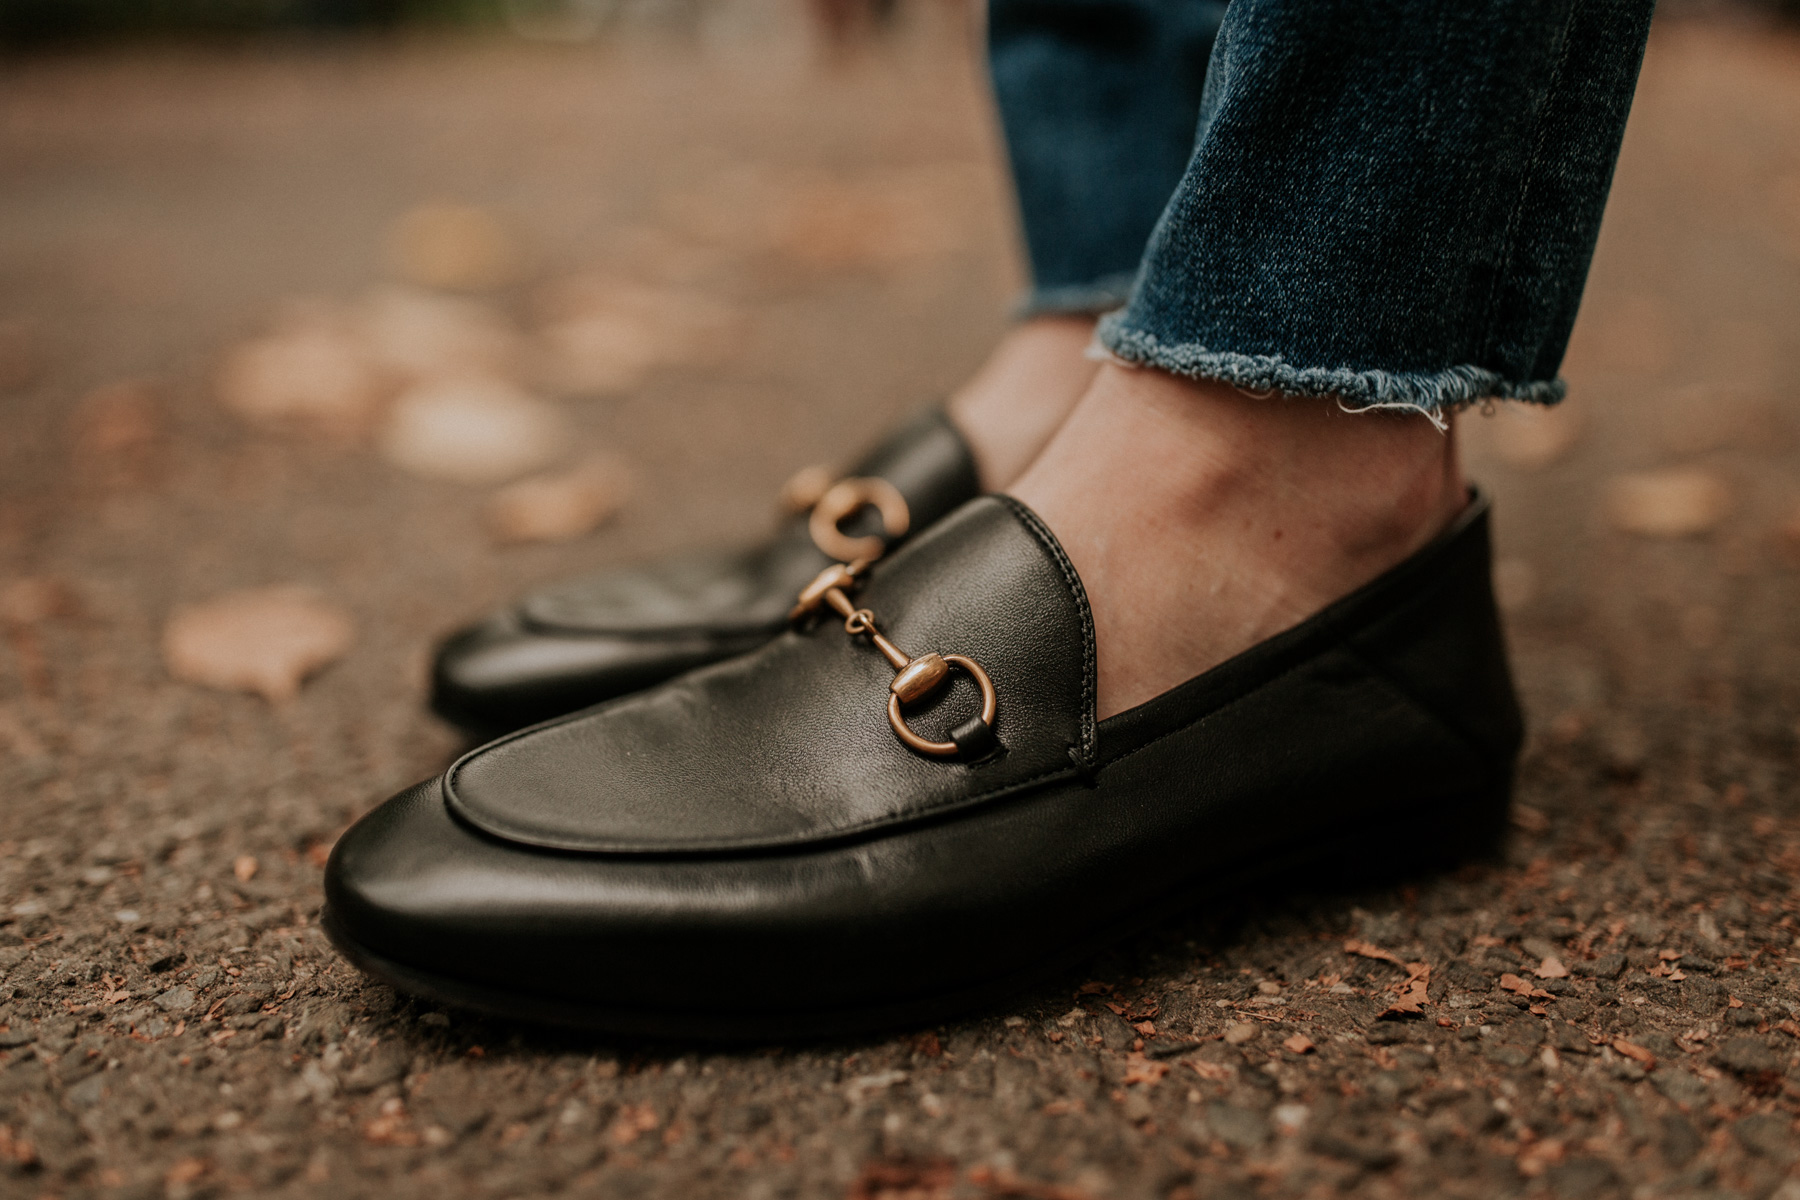 Gucci Brixton Leather Loafer